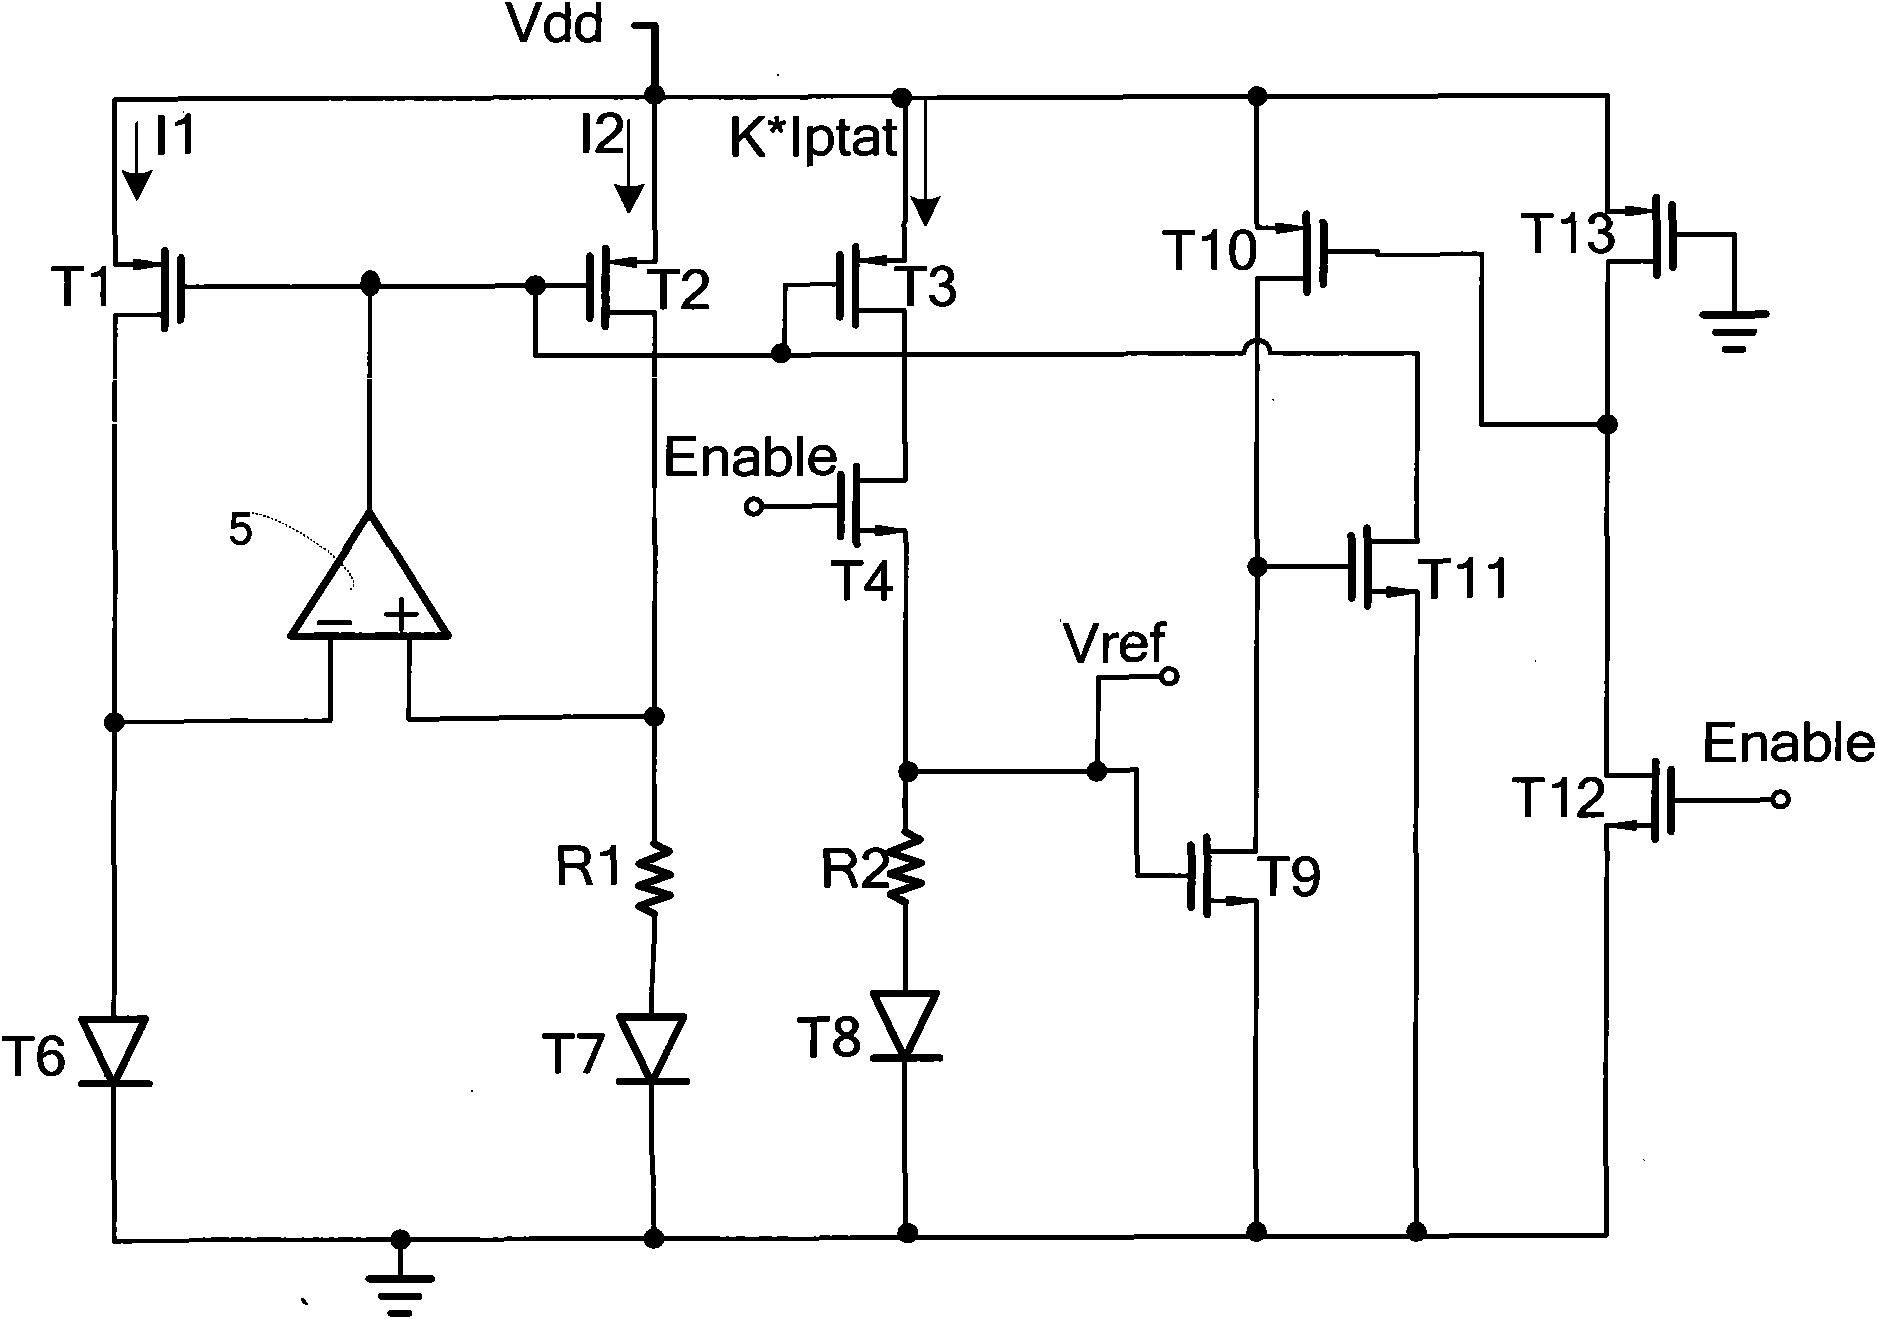 Voltage reference circuit with switch control characteristic